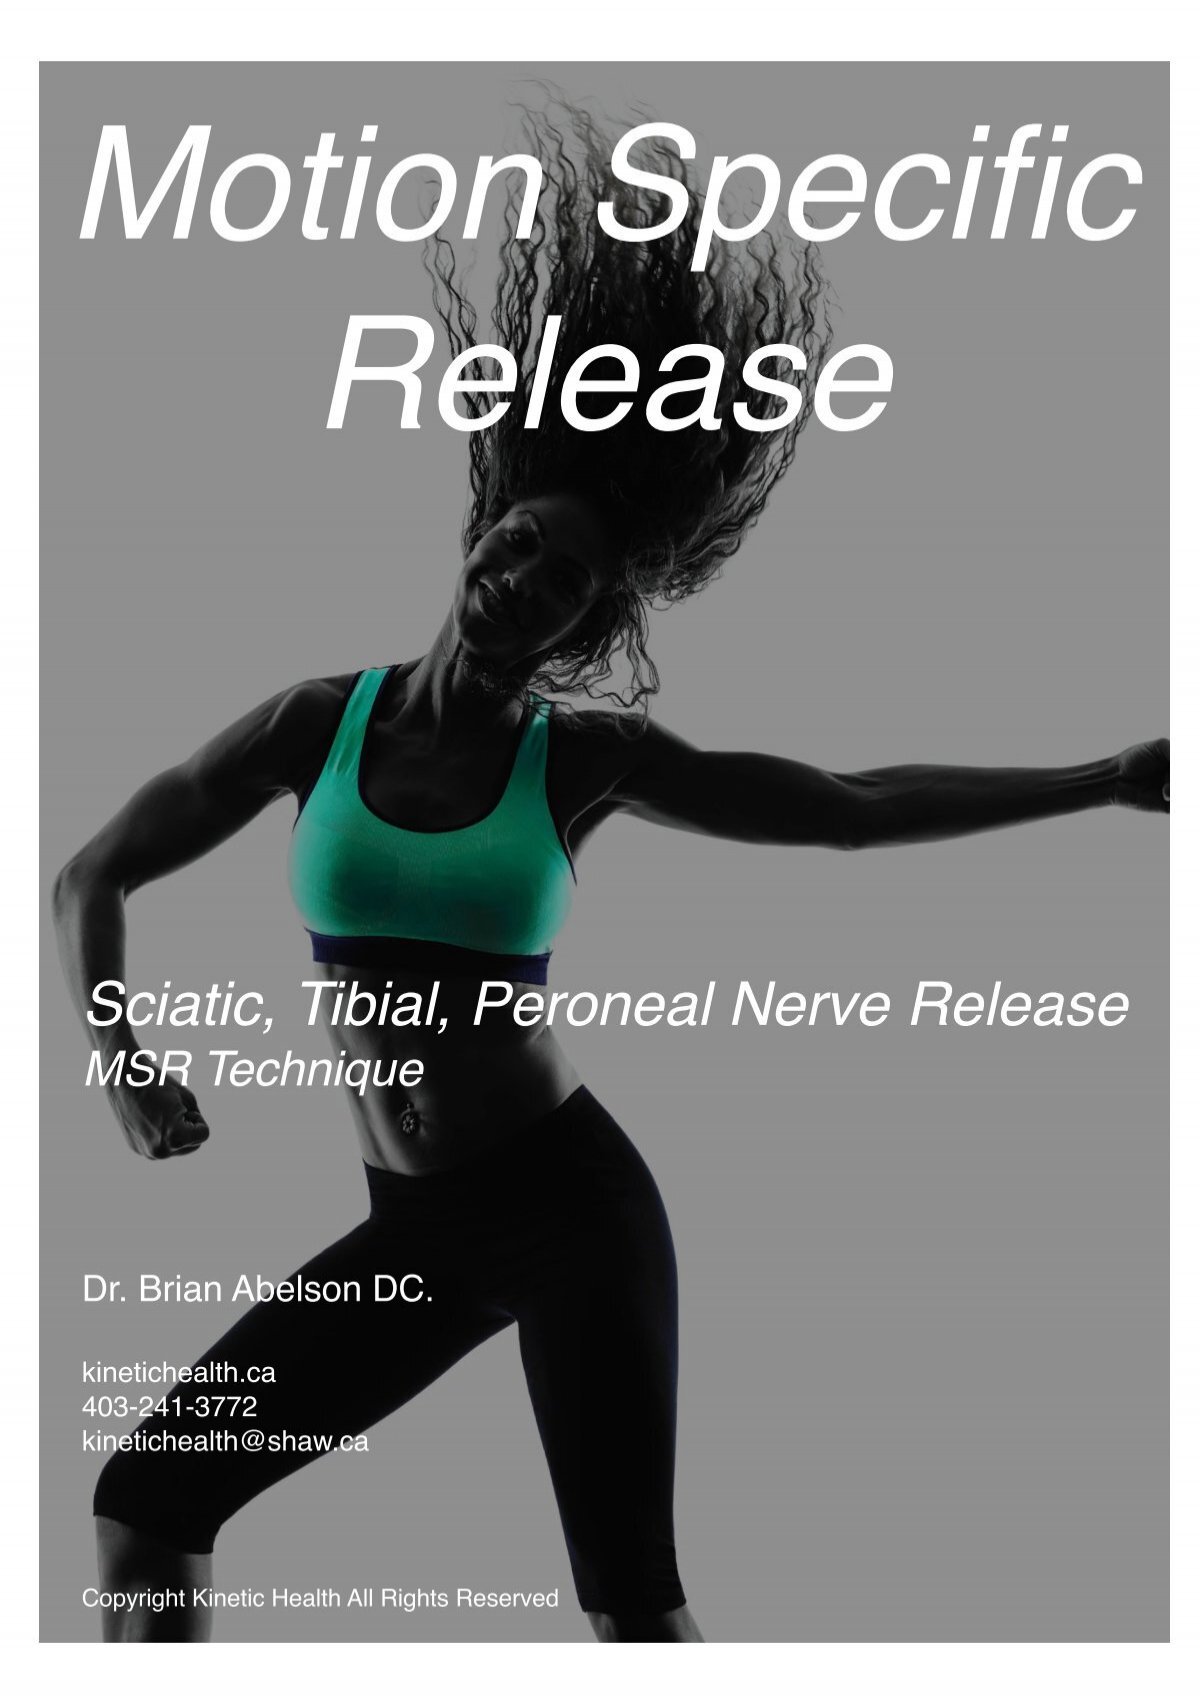 The Sciatic, Tibial & Peroneal Nerve Release